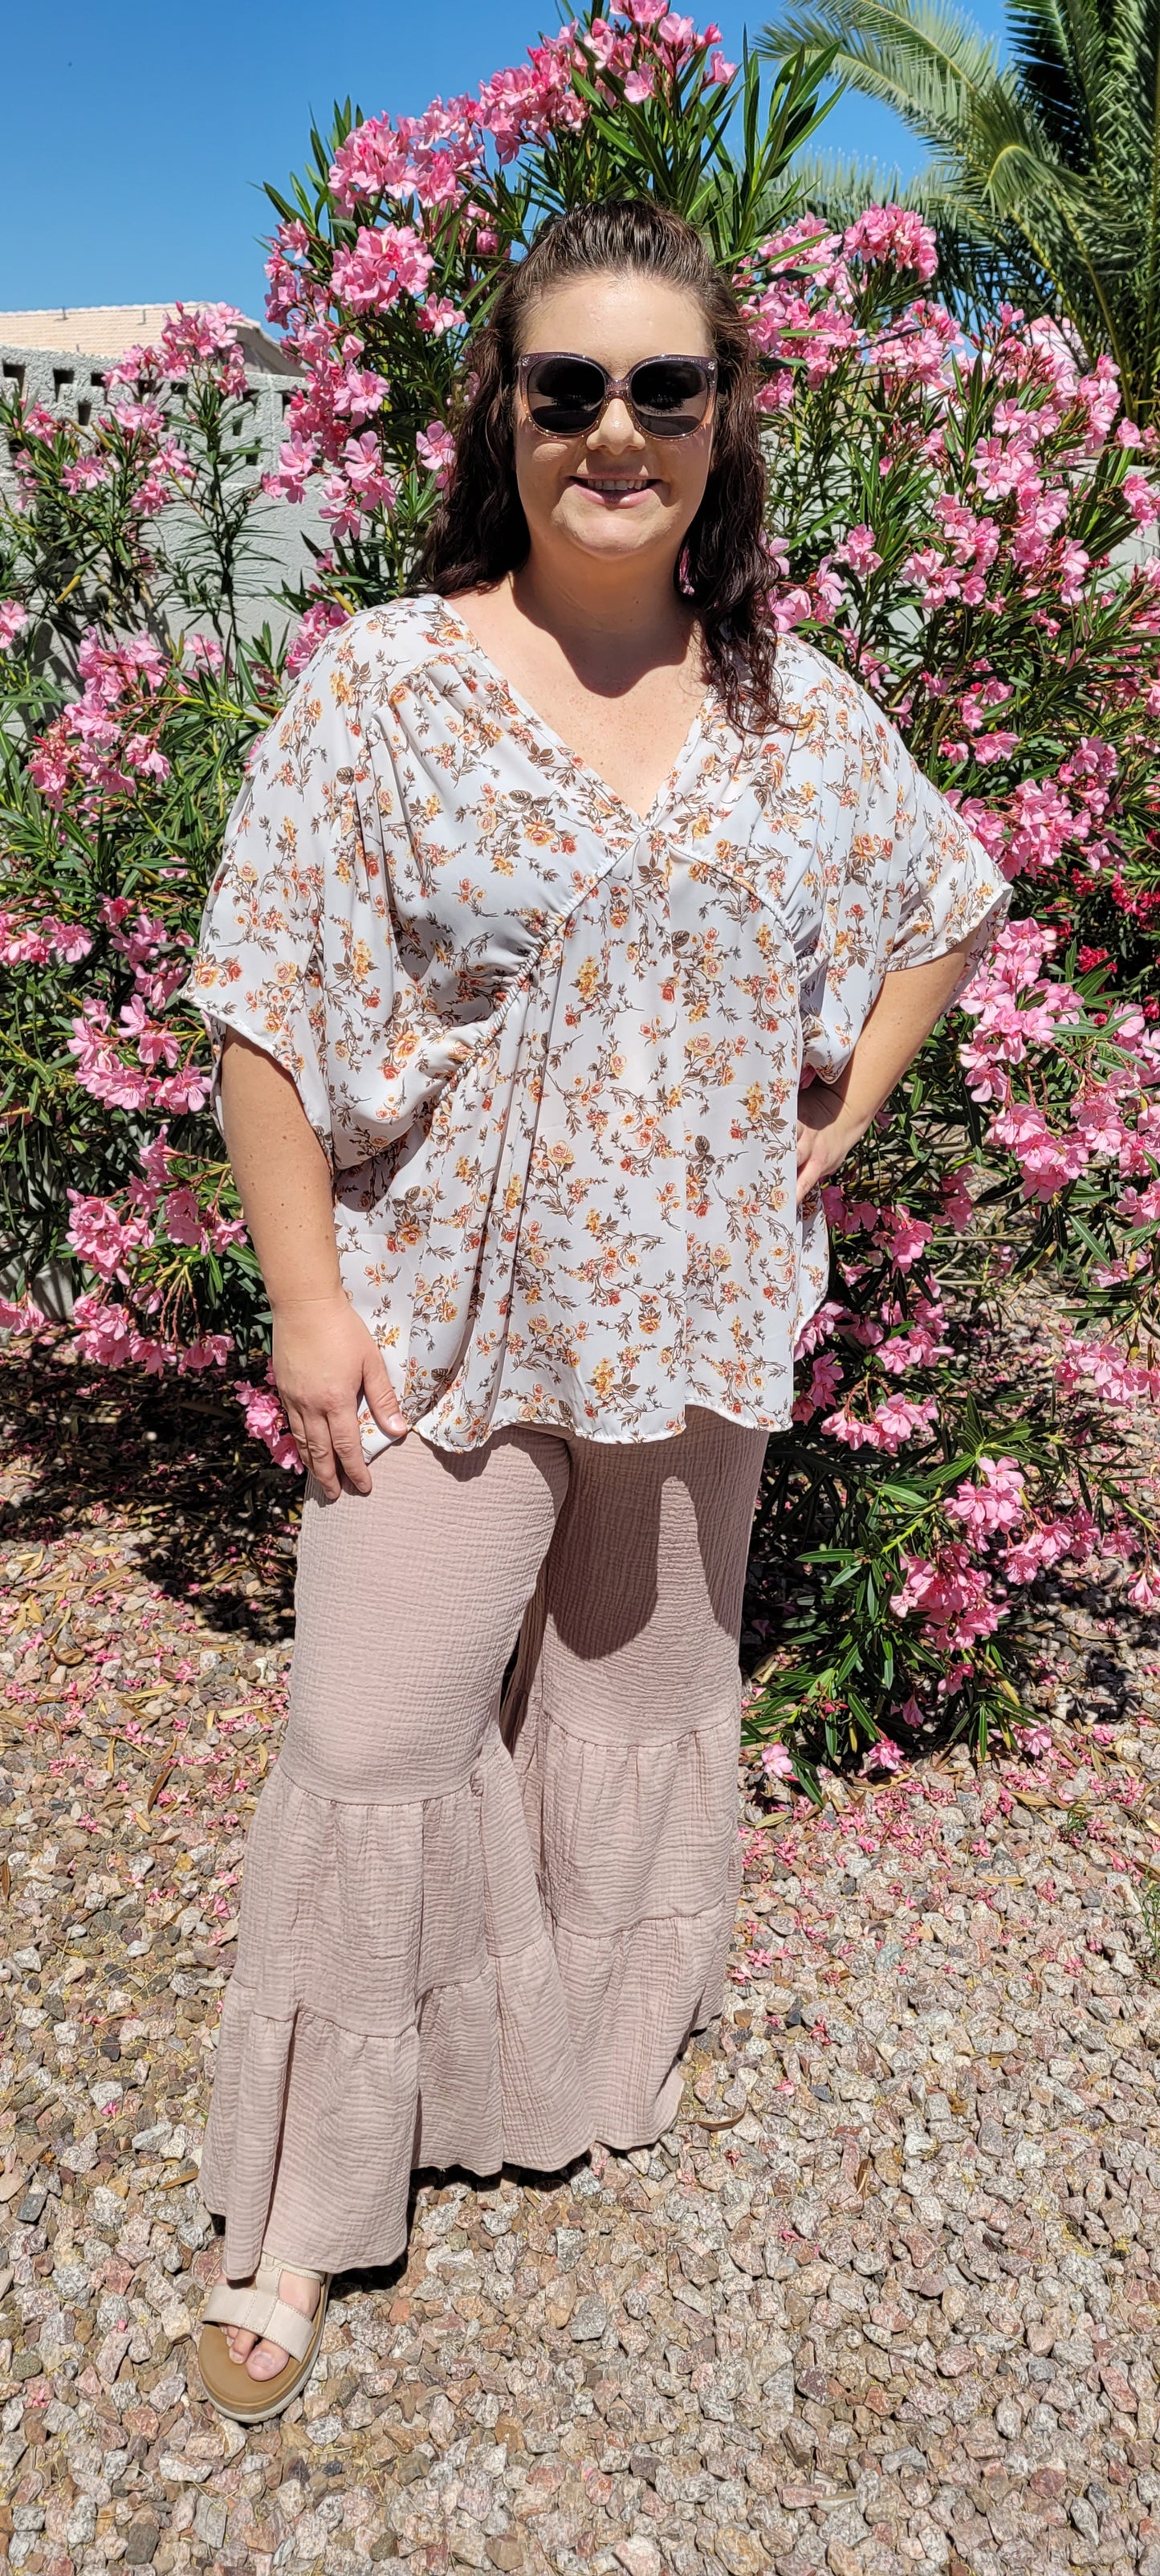 “Sands Of Time”  are a taupe double tiered wide leg, cotton gauze pants. The pants feature a high waisted elastic waistband, wide leg flare. These pants can be dressed up or casual. They are perfect for vacation, as they are light and breezy. Sizes small through large.